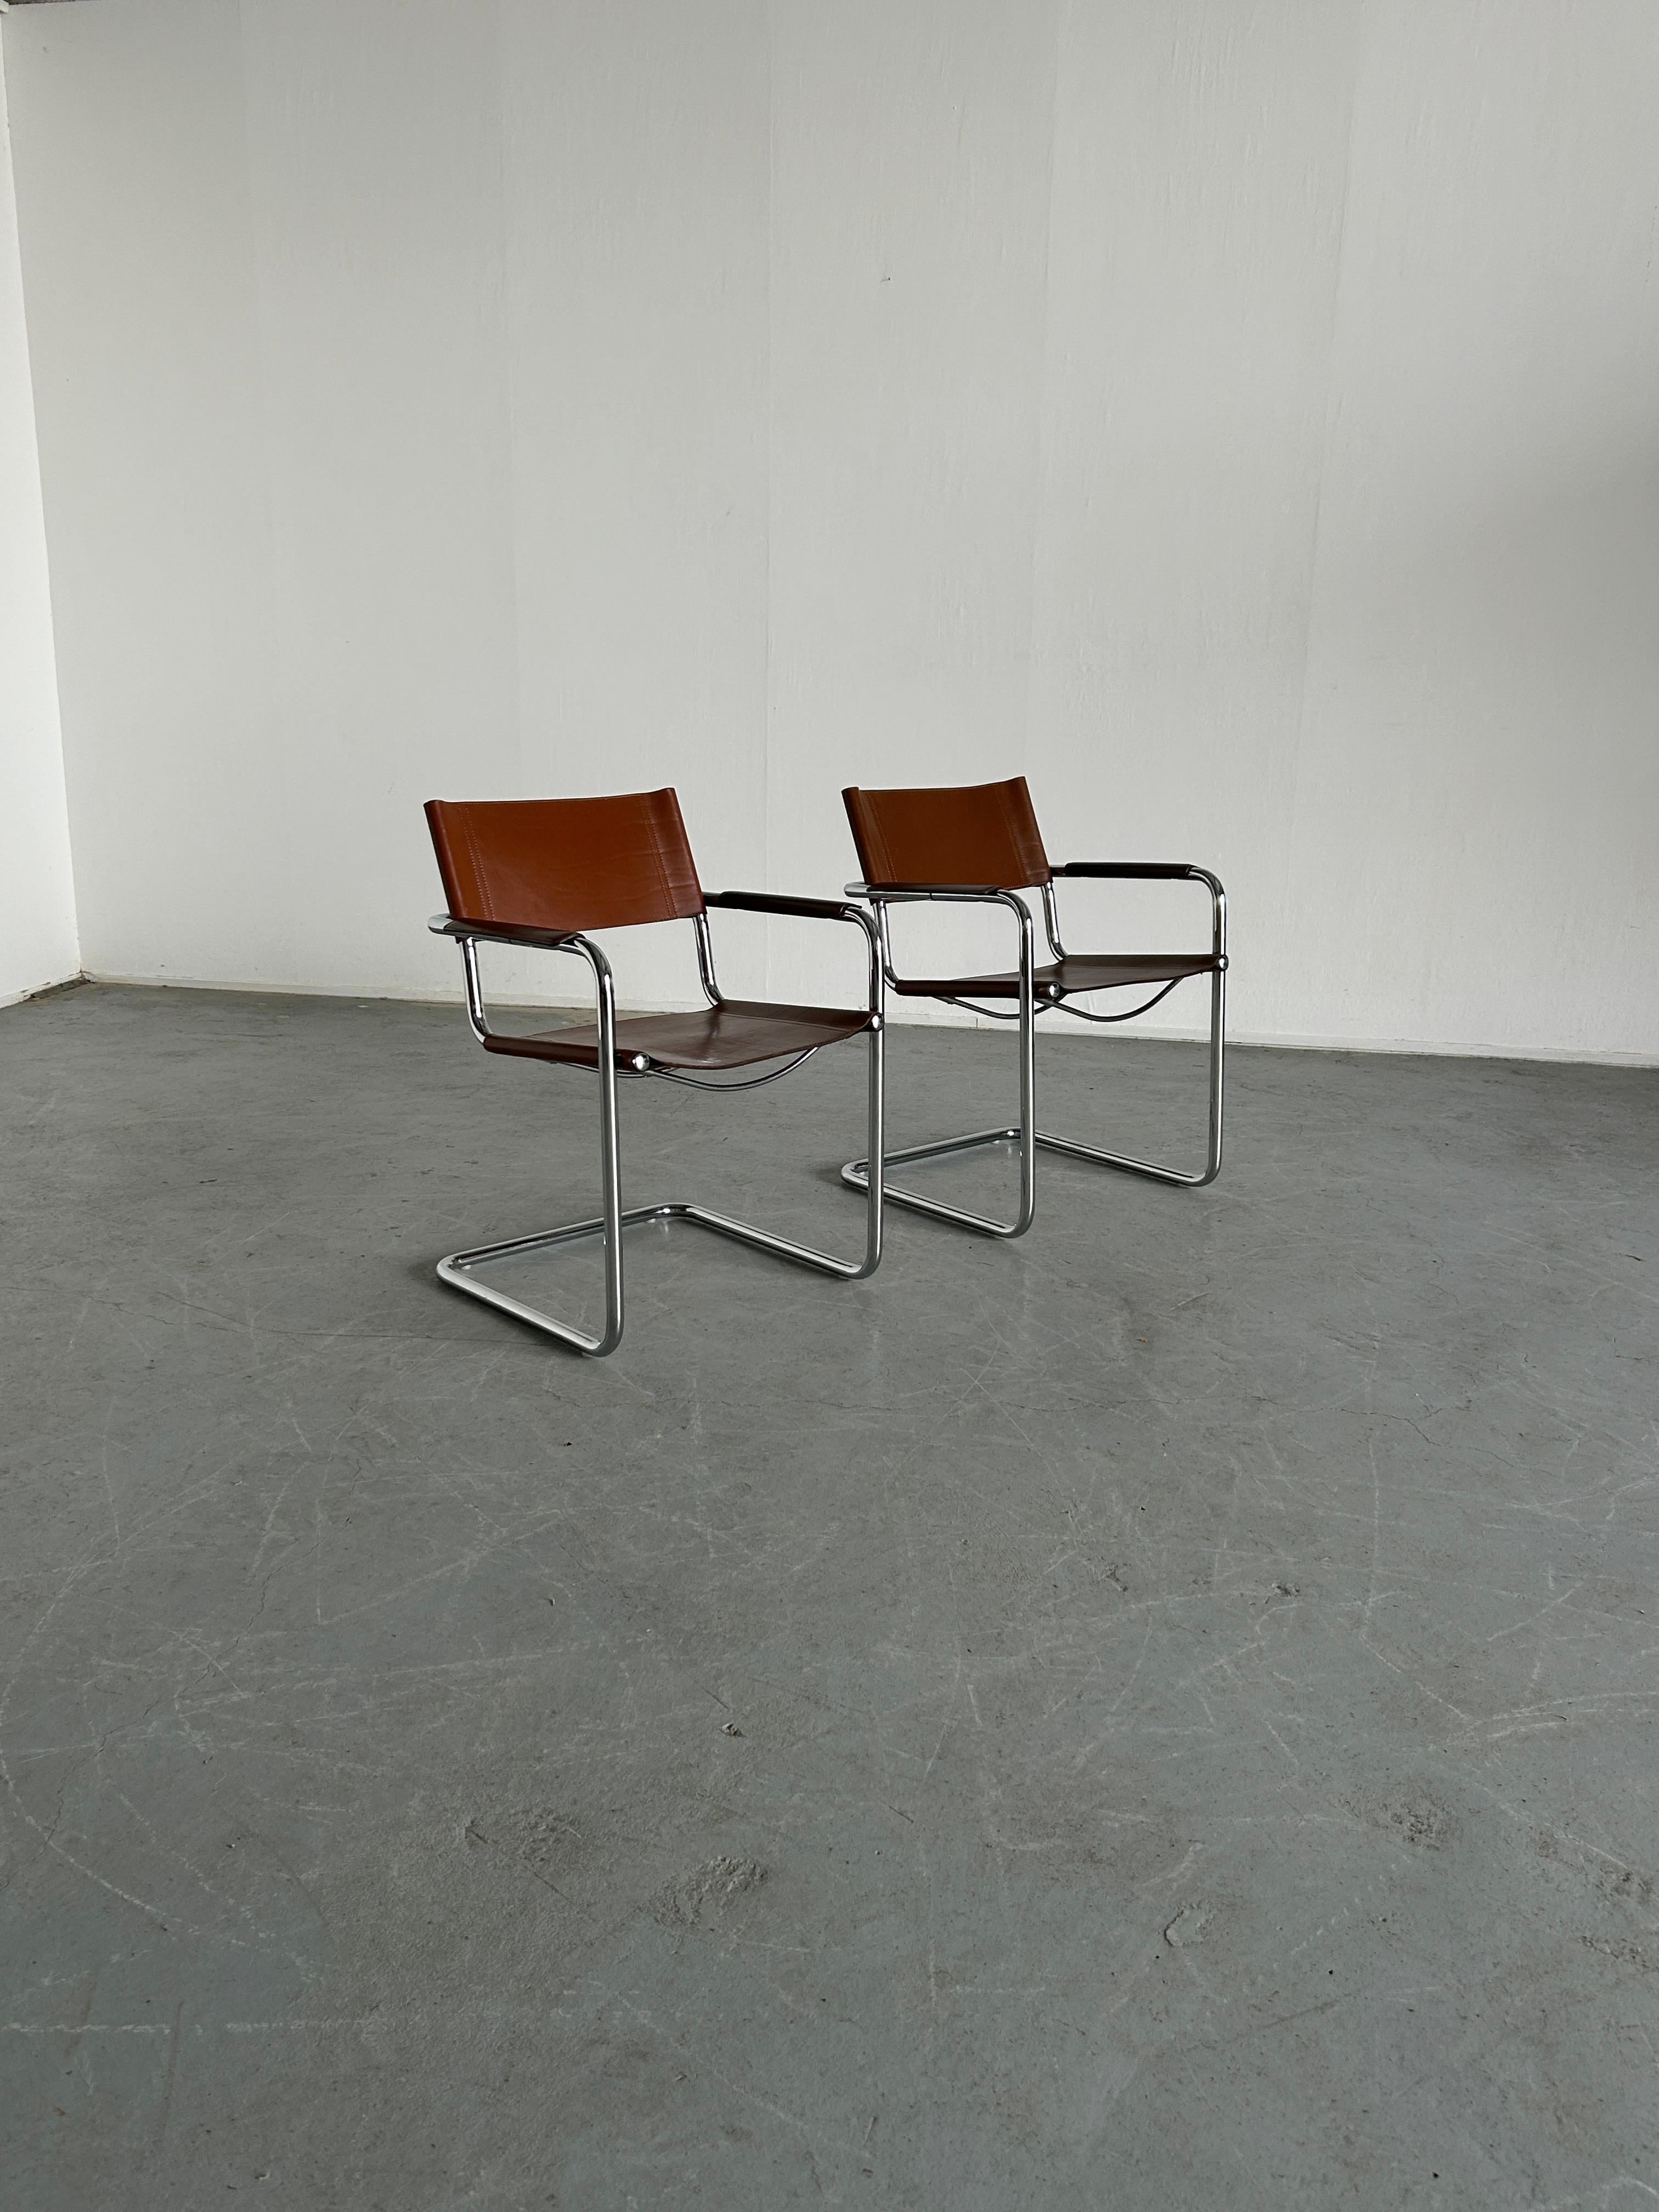 Set of two cantilevered armchairs designed by Centro Studi architects for Matteo Grassi.
Based on the iconic Bauhaus design by Mart Stam and Marcel Breuer.
Tubular chromed steel and brown cognac leather.
Leather back embossed with 